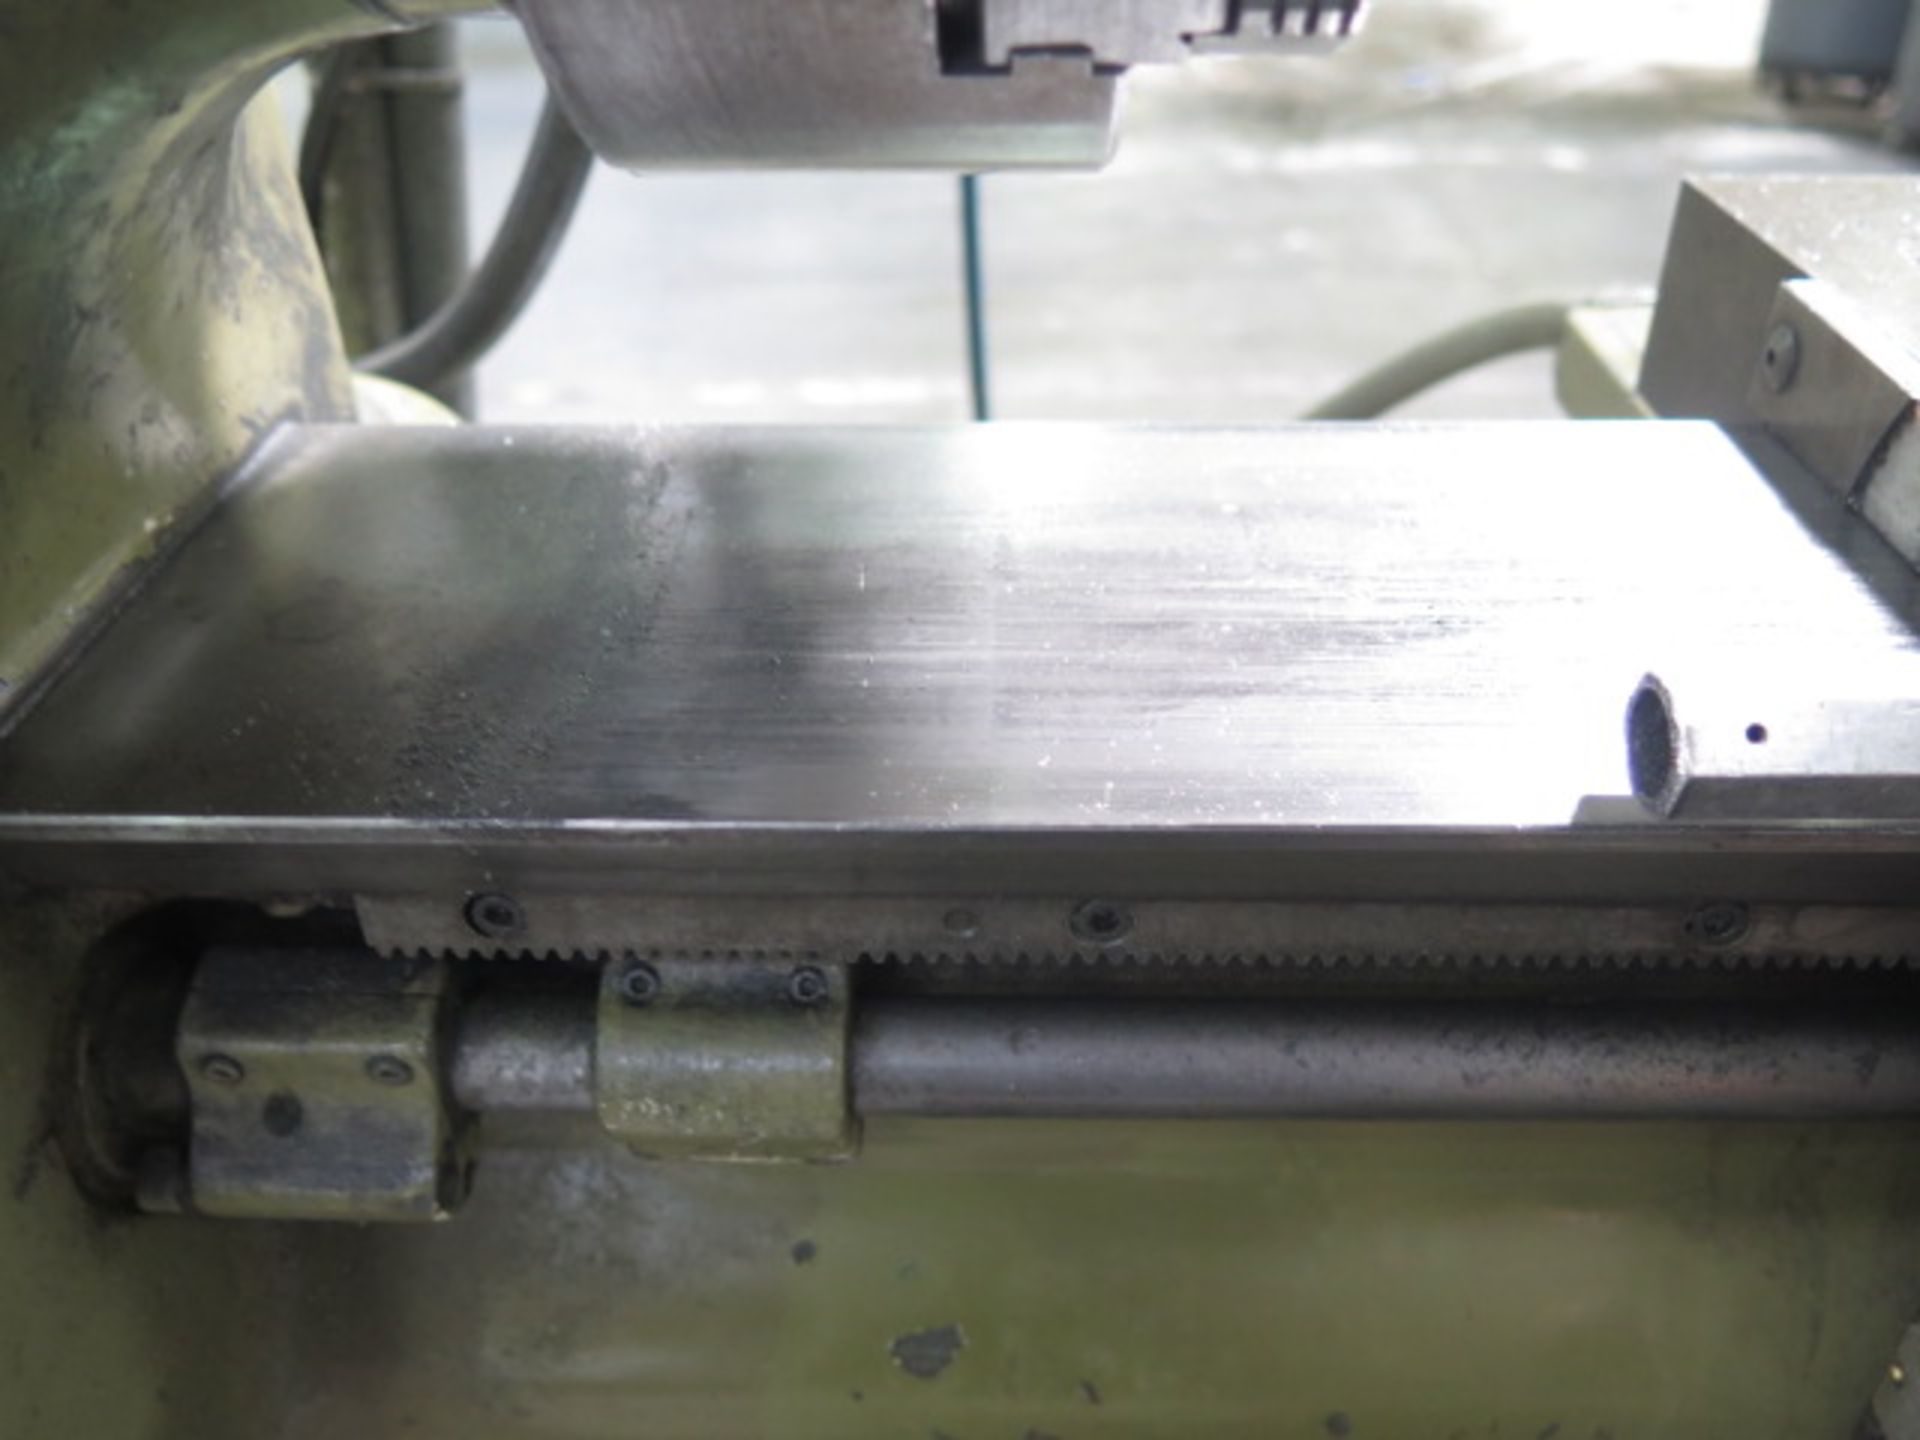 Hardinge TFB Second OP Lathe w/ 125-3000 RPM, 5C Collet Closer, PF, Aloris Tool Post, SOLD AS IS - Image 8 of 10